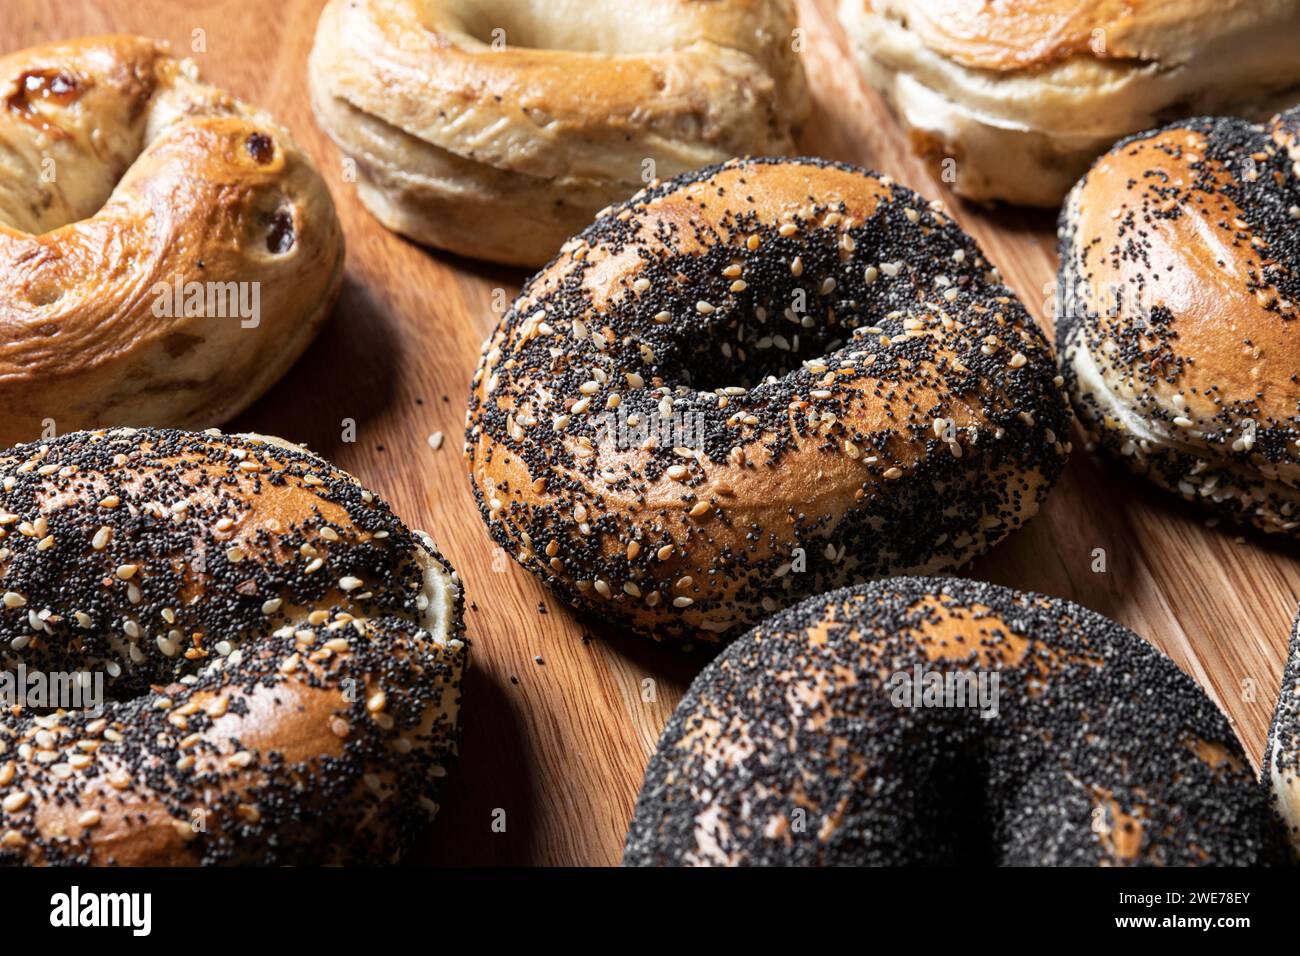 Group of bagels arranged on a wooden surface. Stock Photo